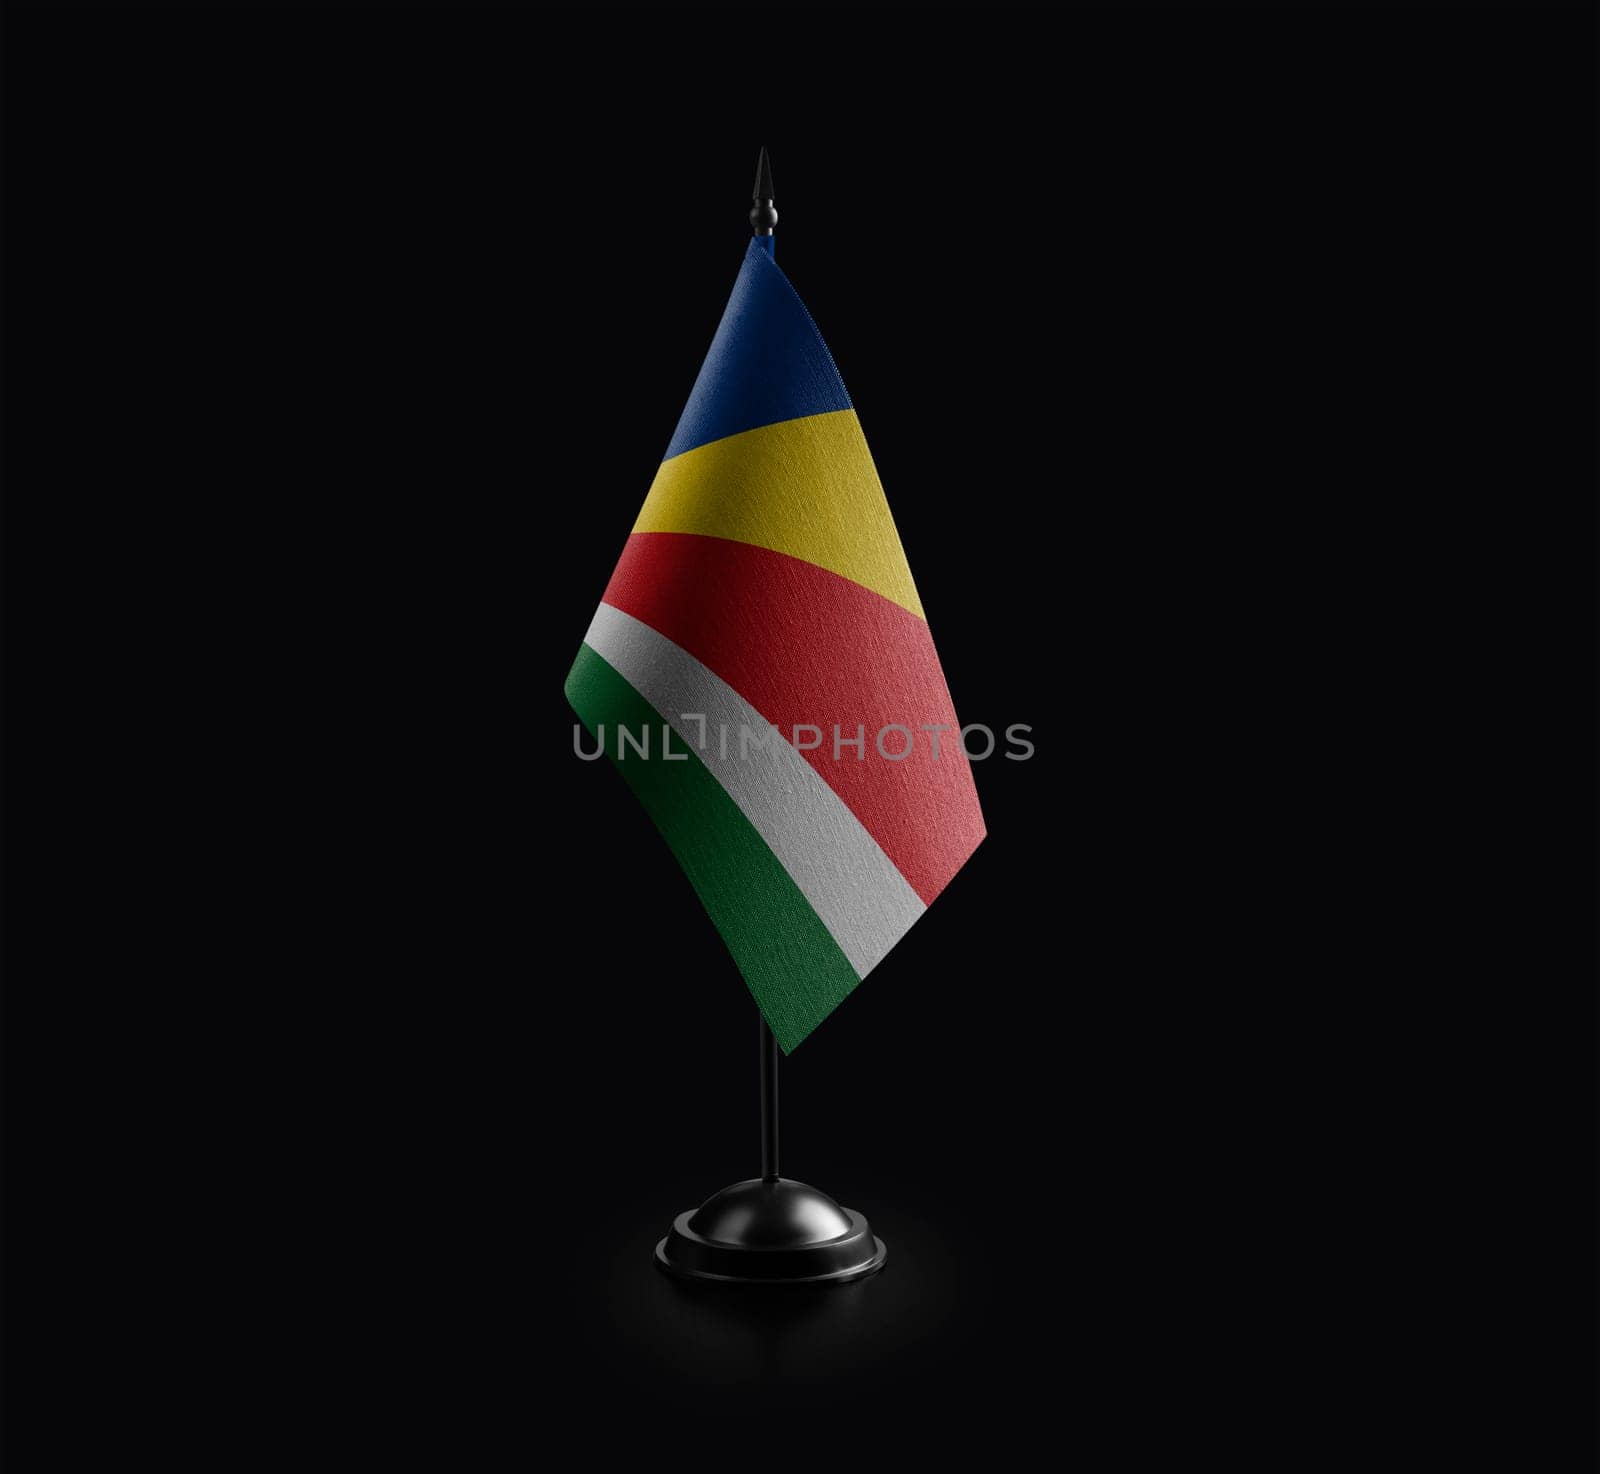 Small national flag of the Seychelles on a black background.